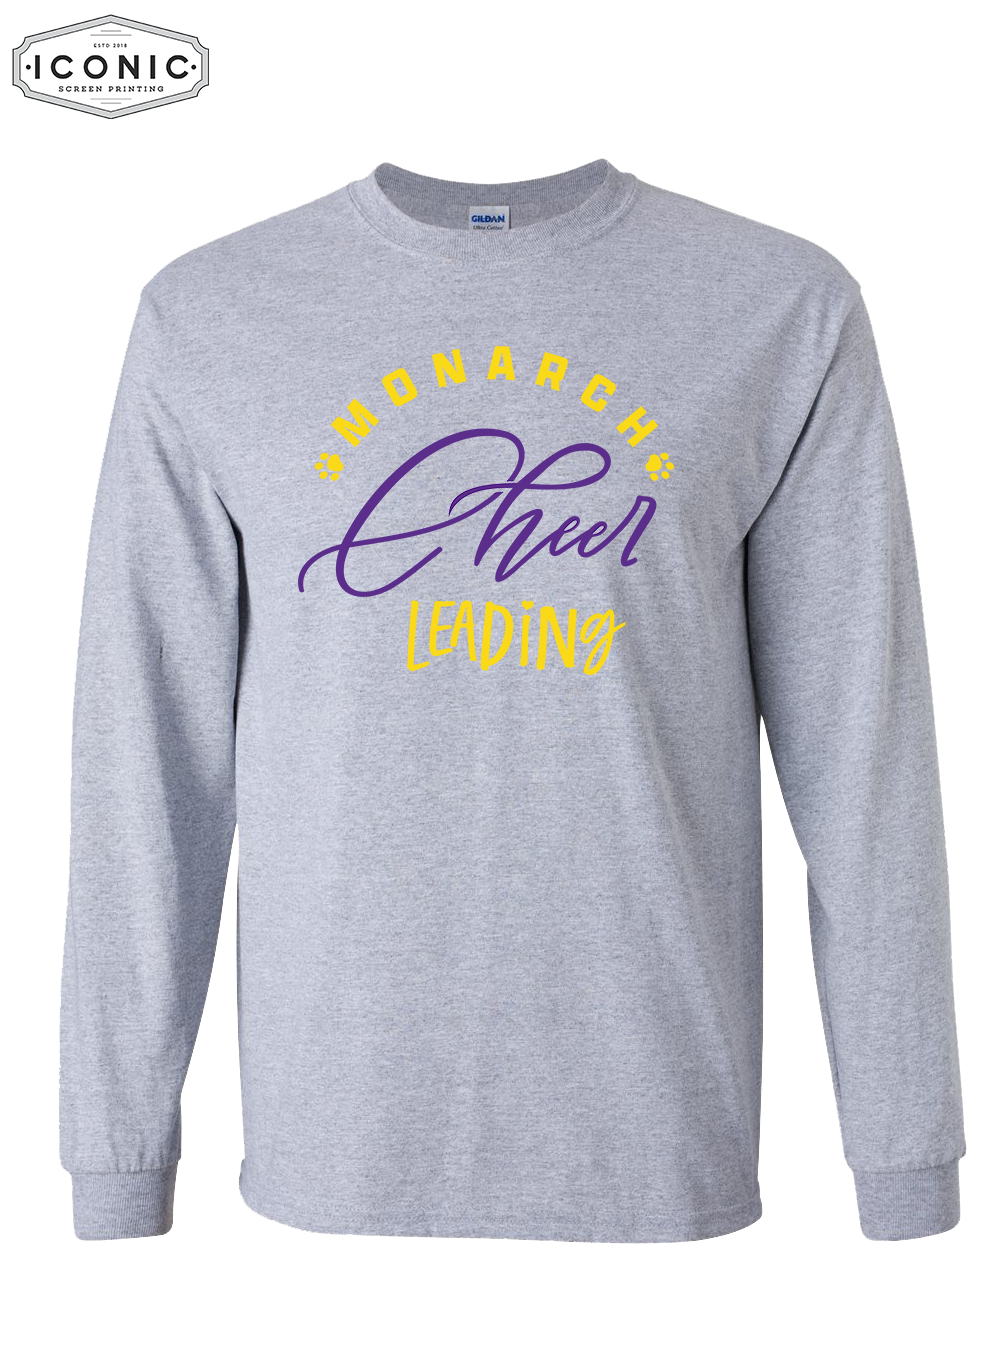 Monarch Cheer Leading - Ultra Cotton Long Sleeve